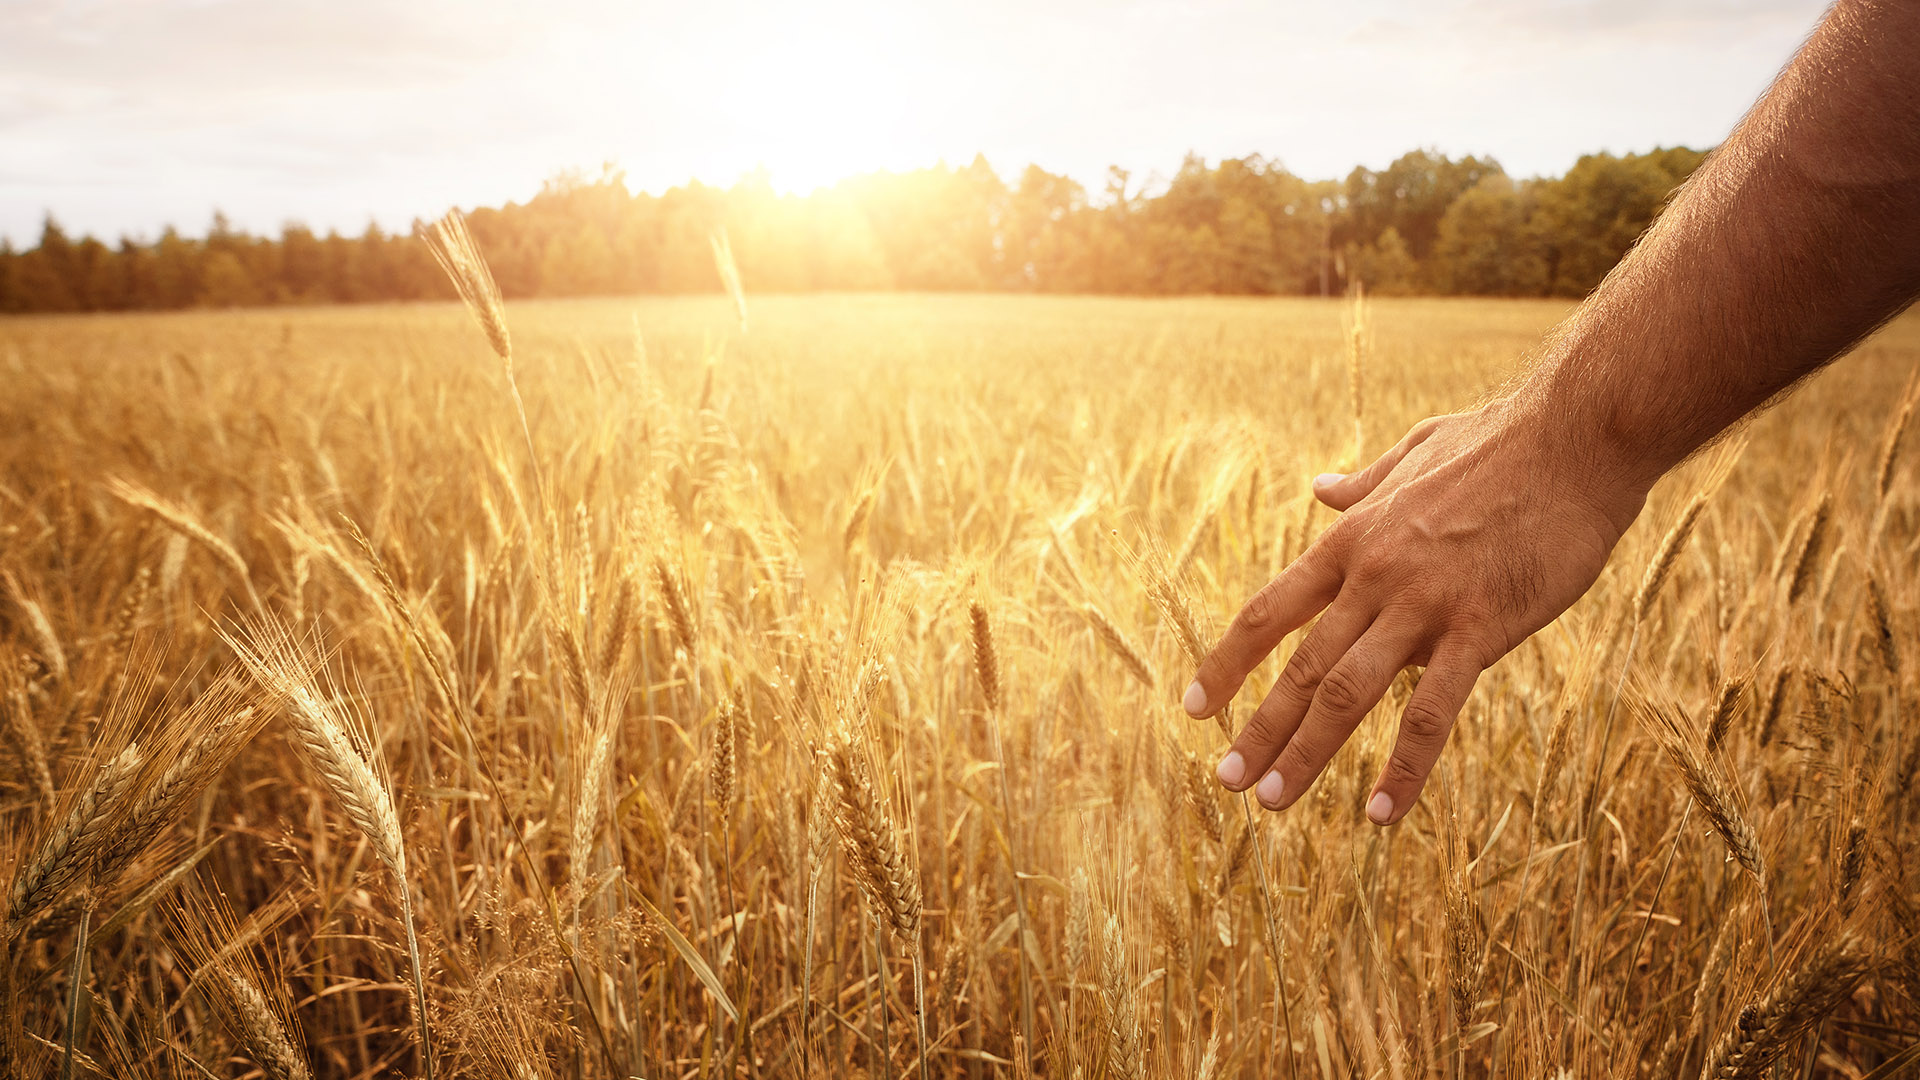 A hand brushing across the top of wheat in a field of wheat crops.